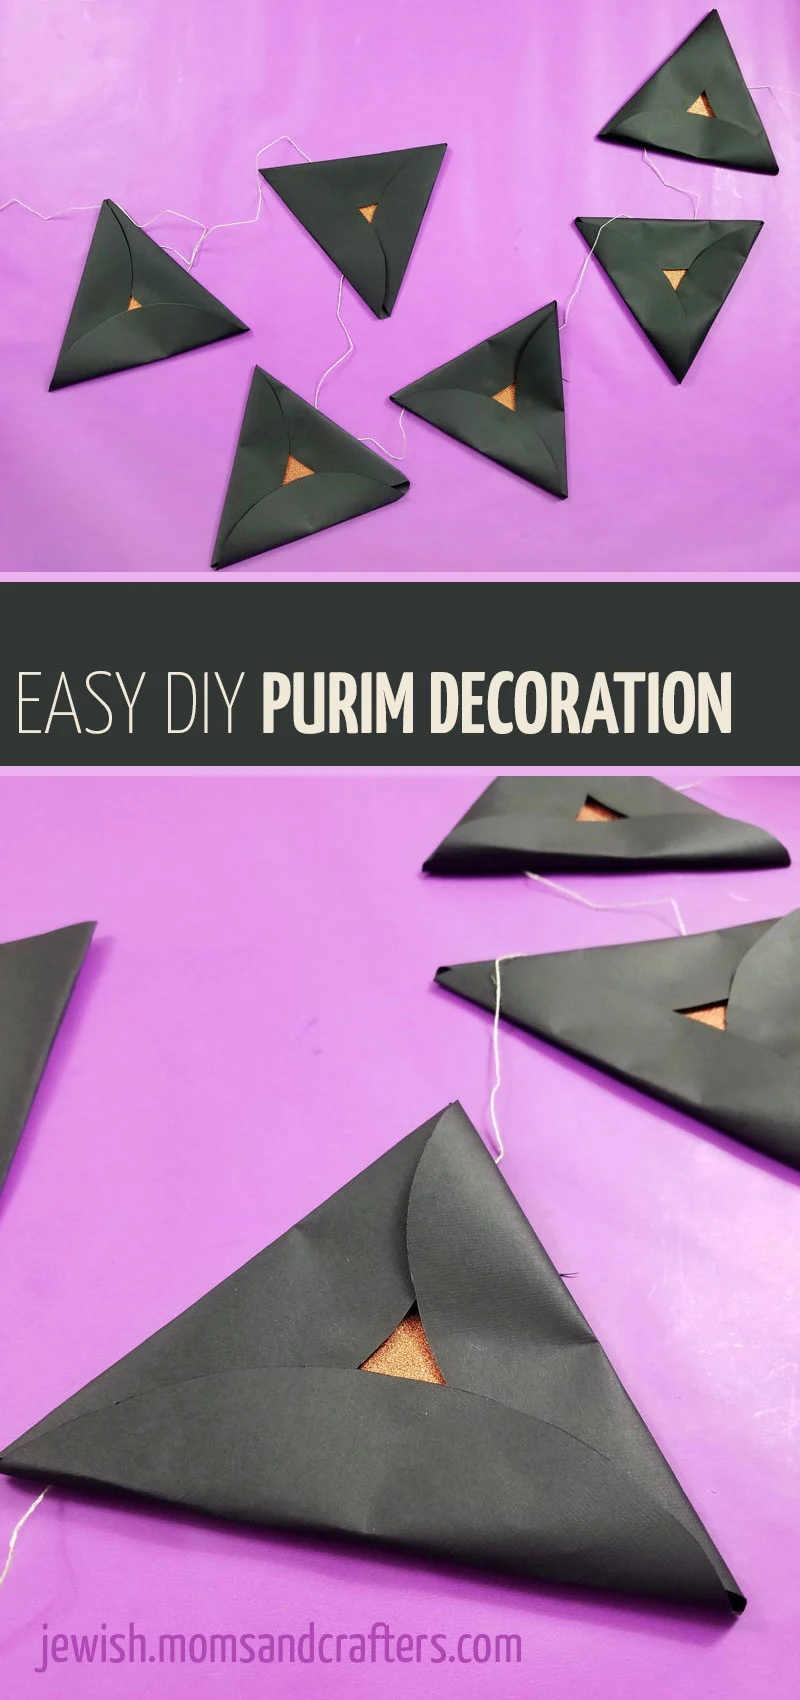 Click for an easy tutorial to make folded paper hamantaschen and turn them into a garland style Purim decoration! This classy and easy DIY purim decorating idea is great for classrooms or Purim parties and can be made by any age group.